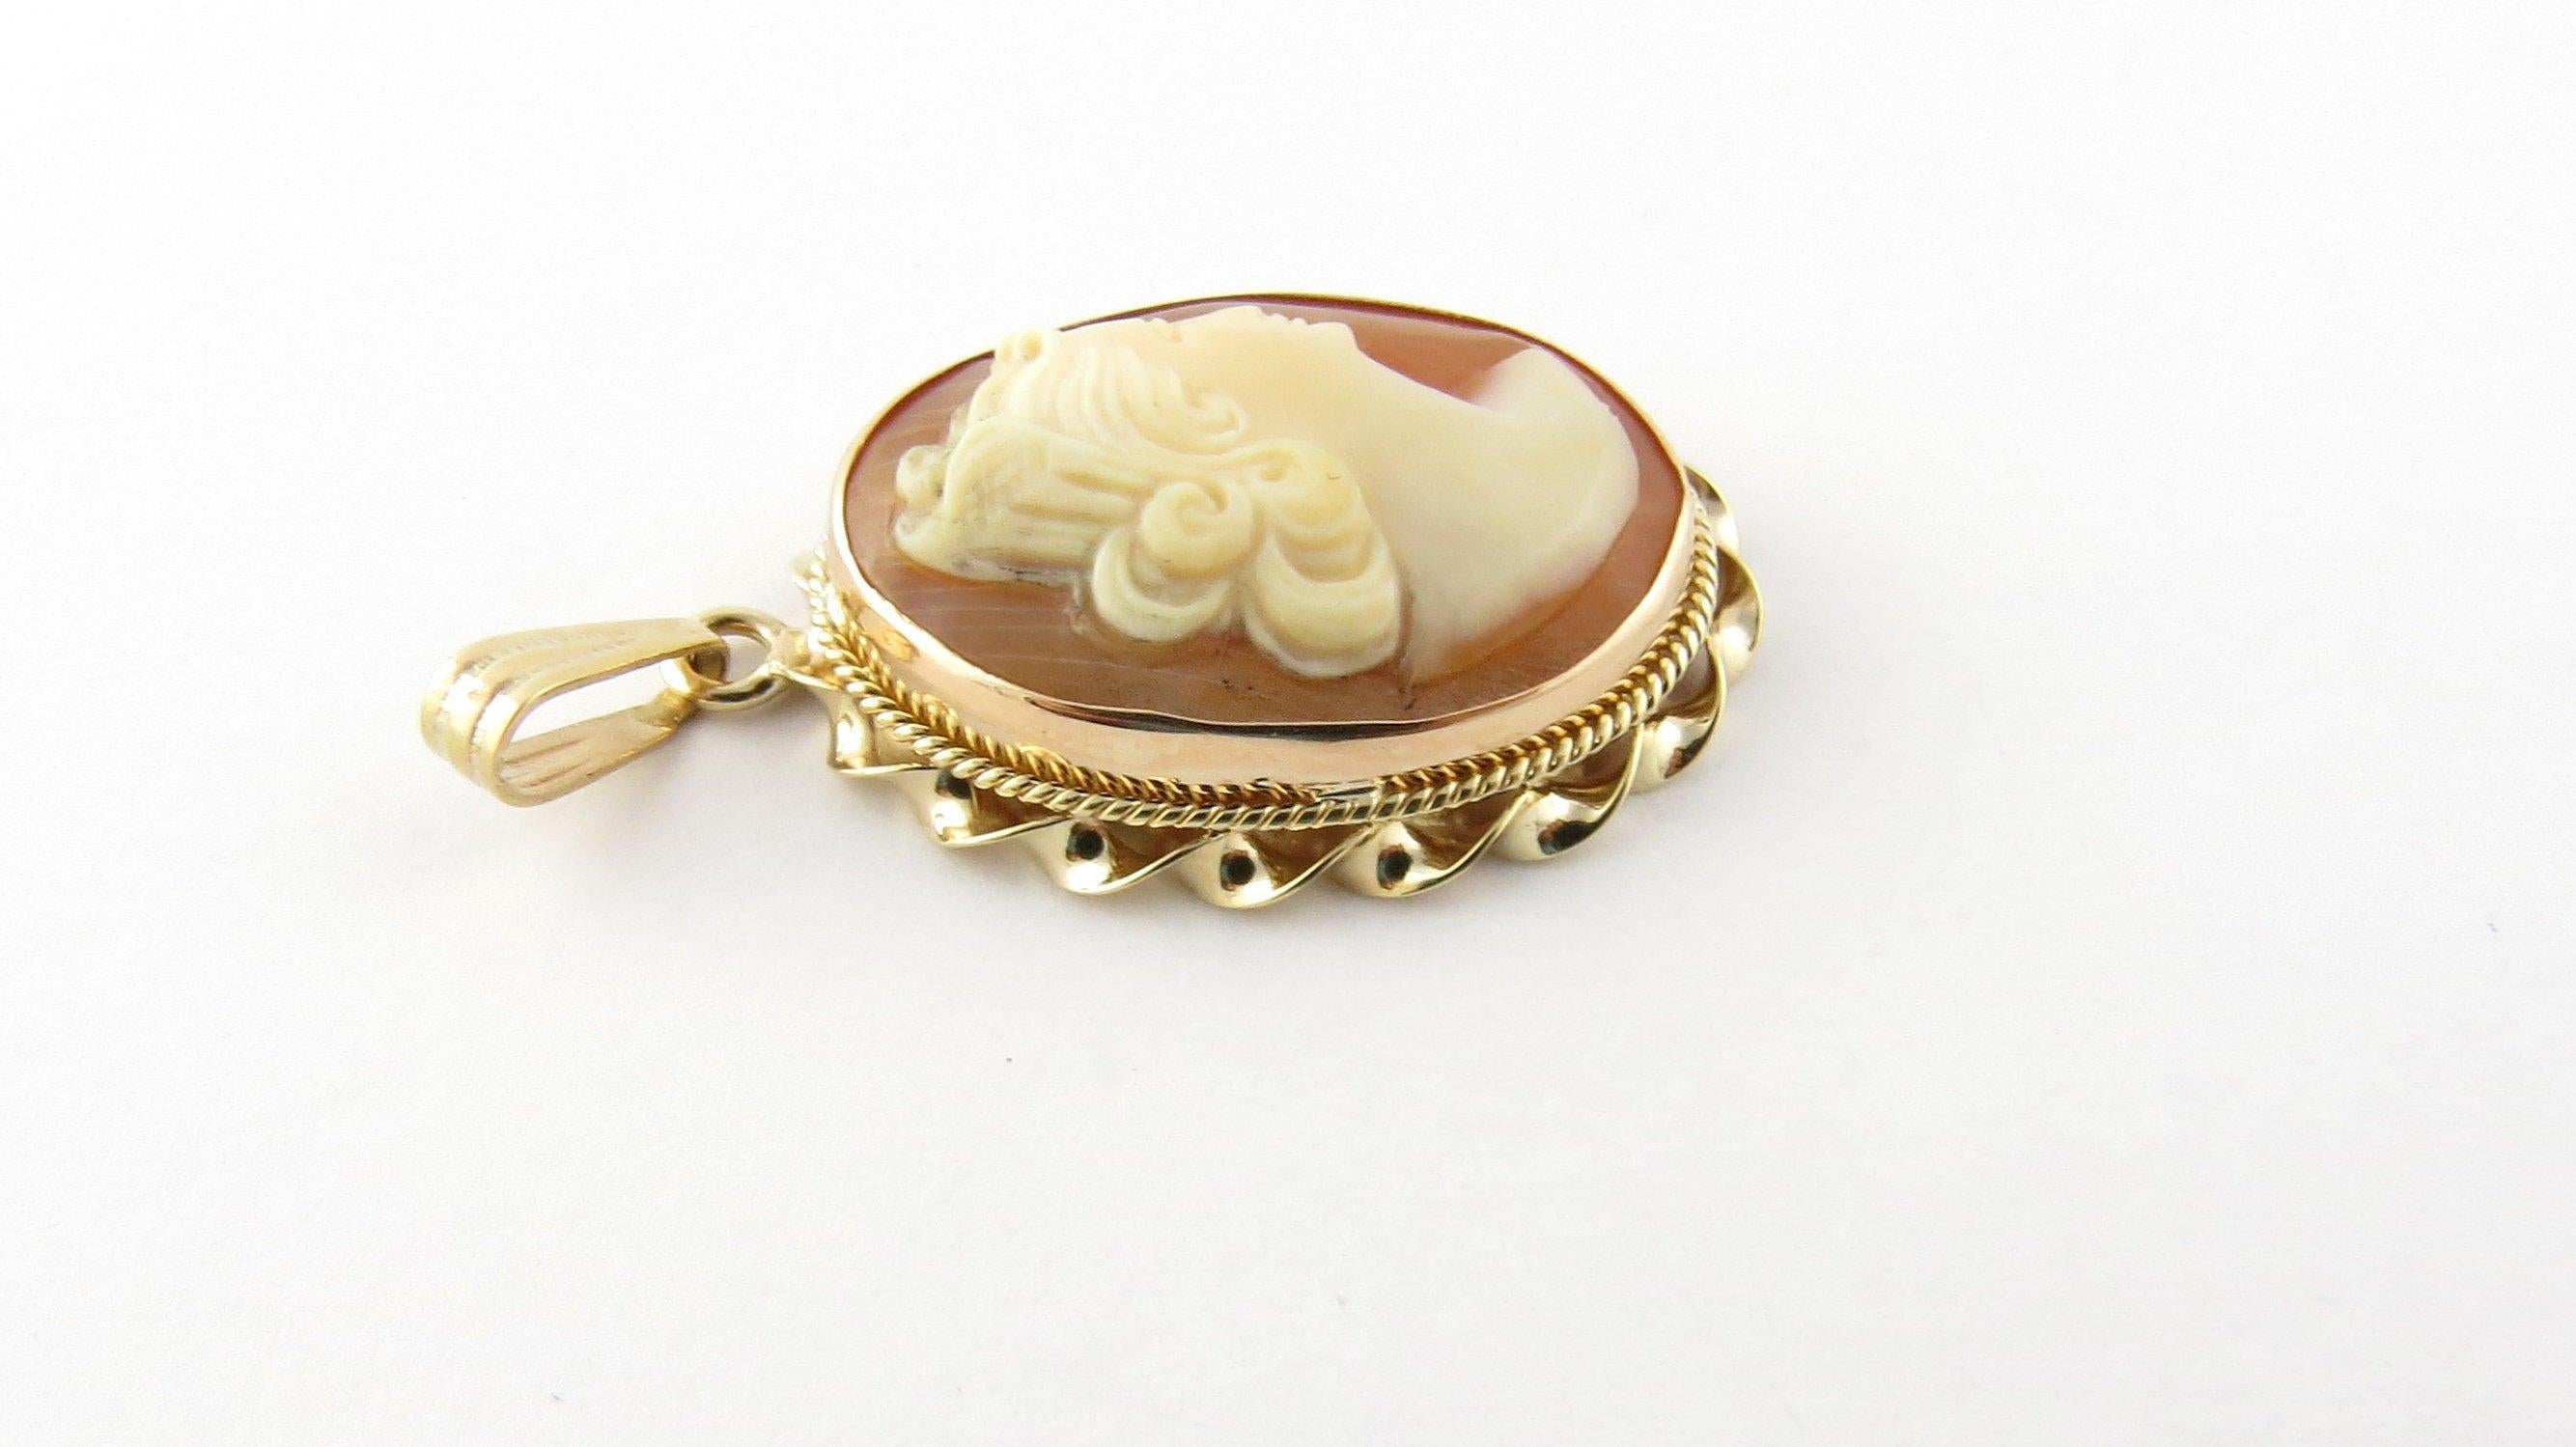 Vintage 14 Karat Yellow Gold Cameo Pendant. This lovely cameo pendant features a lovely lady in profile framed in 14K yellow gold.
Size: 27 mm x 19 mm. Weight: 1.9 dwt. / 3.0 gr. Stamped: 14K
Very good condition, professionally polished.